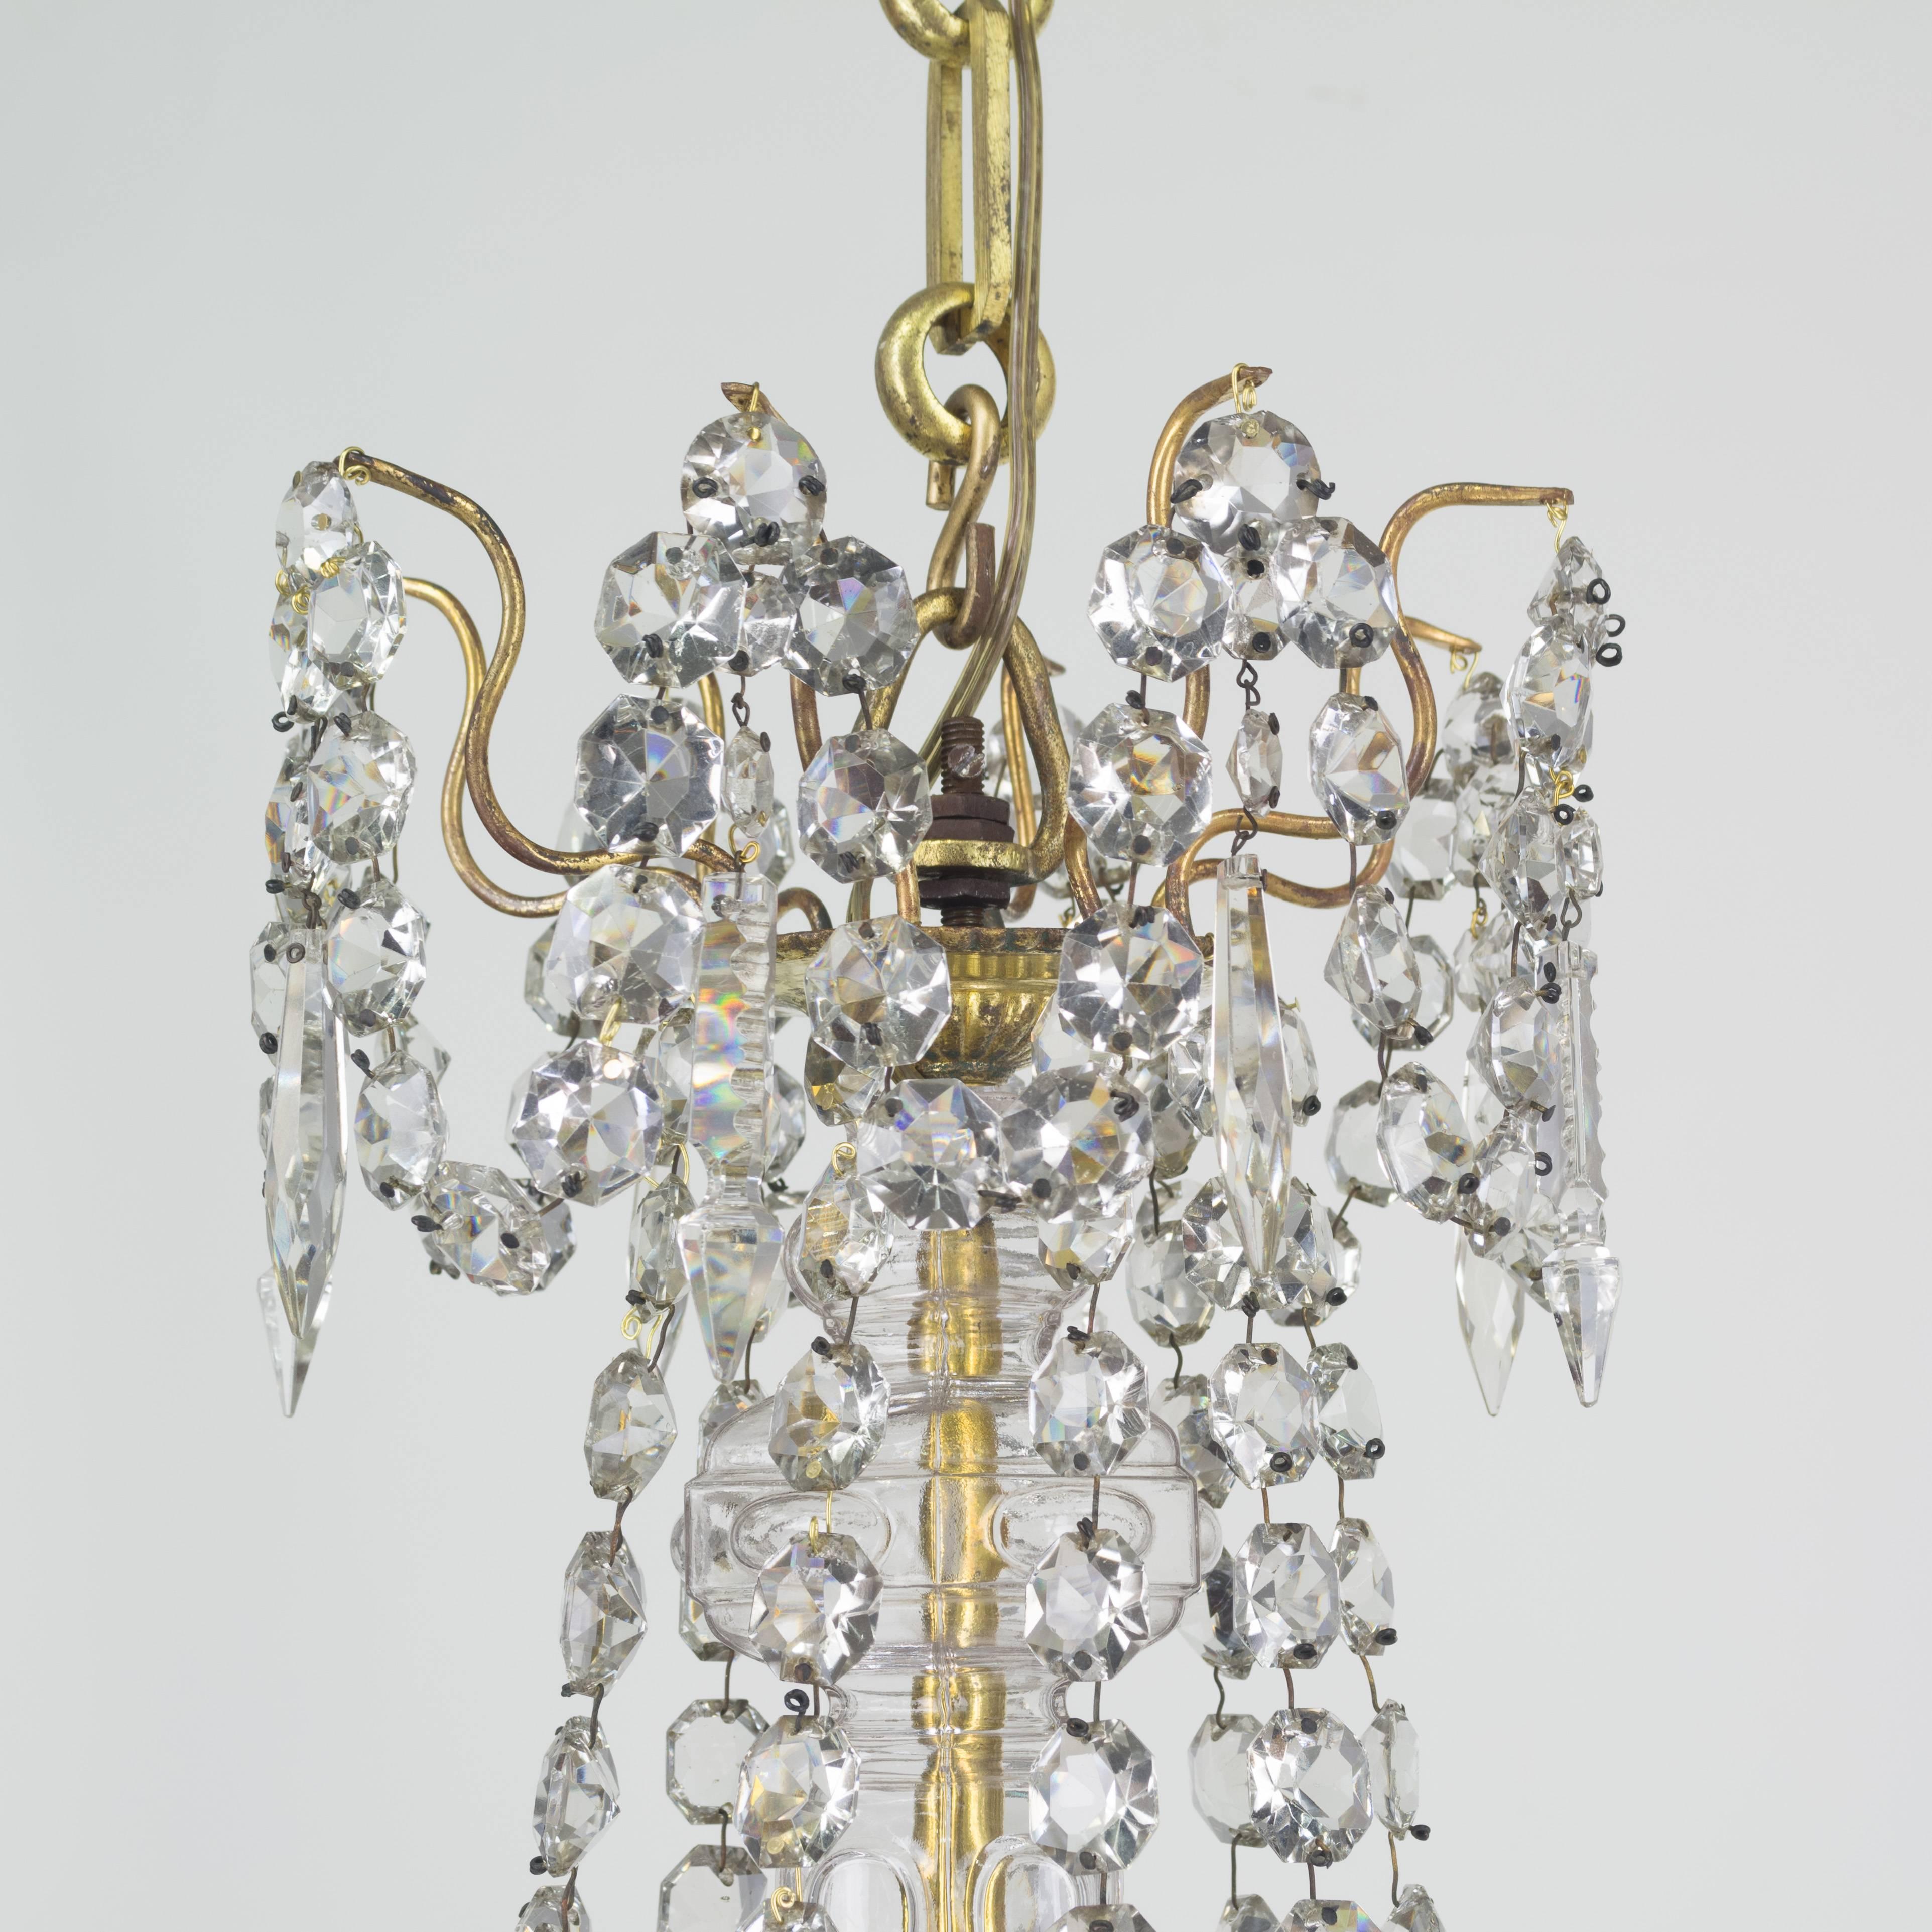 A fine late 19th century French gilt bronze and crystal nine-light chandelier with faceted jewel chains and hanging crystal prisms. Crown with swags and hanging prisms, a waterfall drape connecting to nine upswept candle arms with glass bobeches.